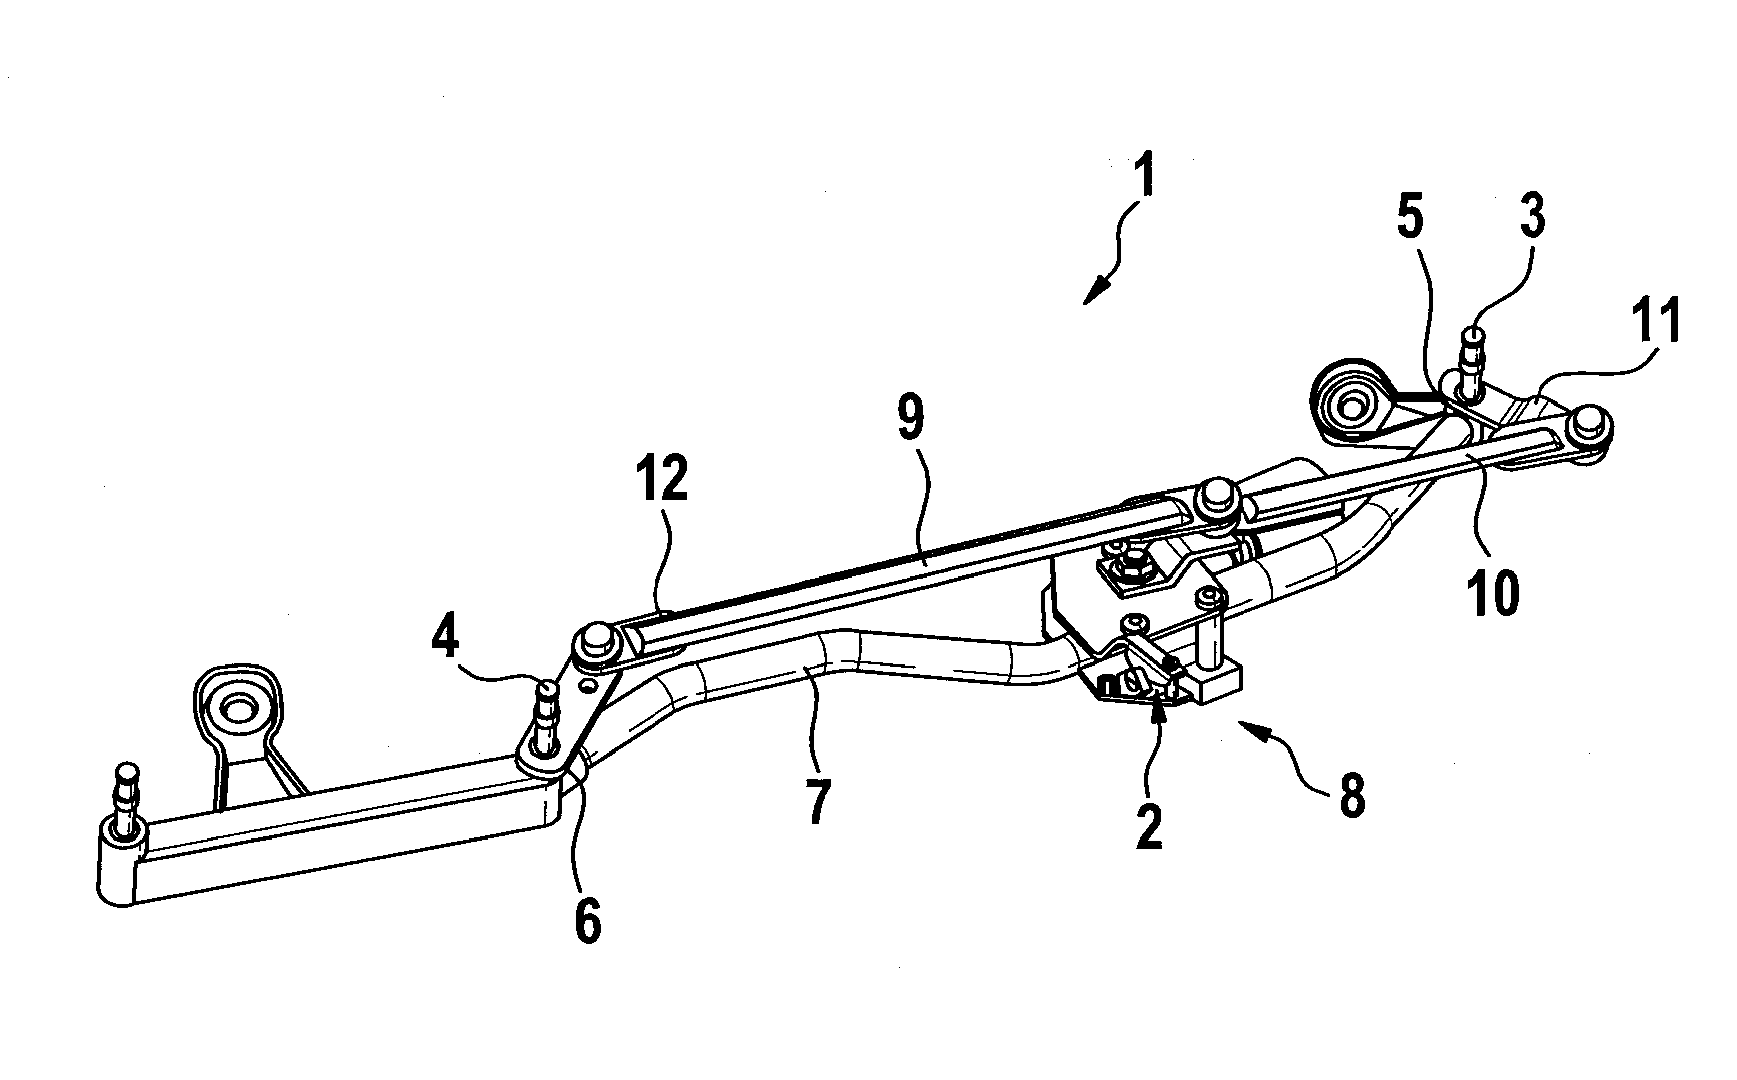 Windshield wiping device